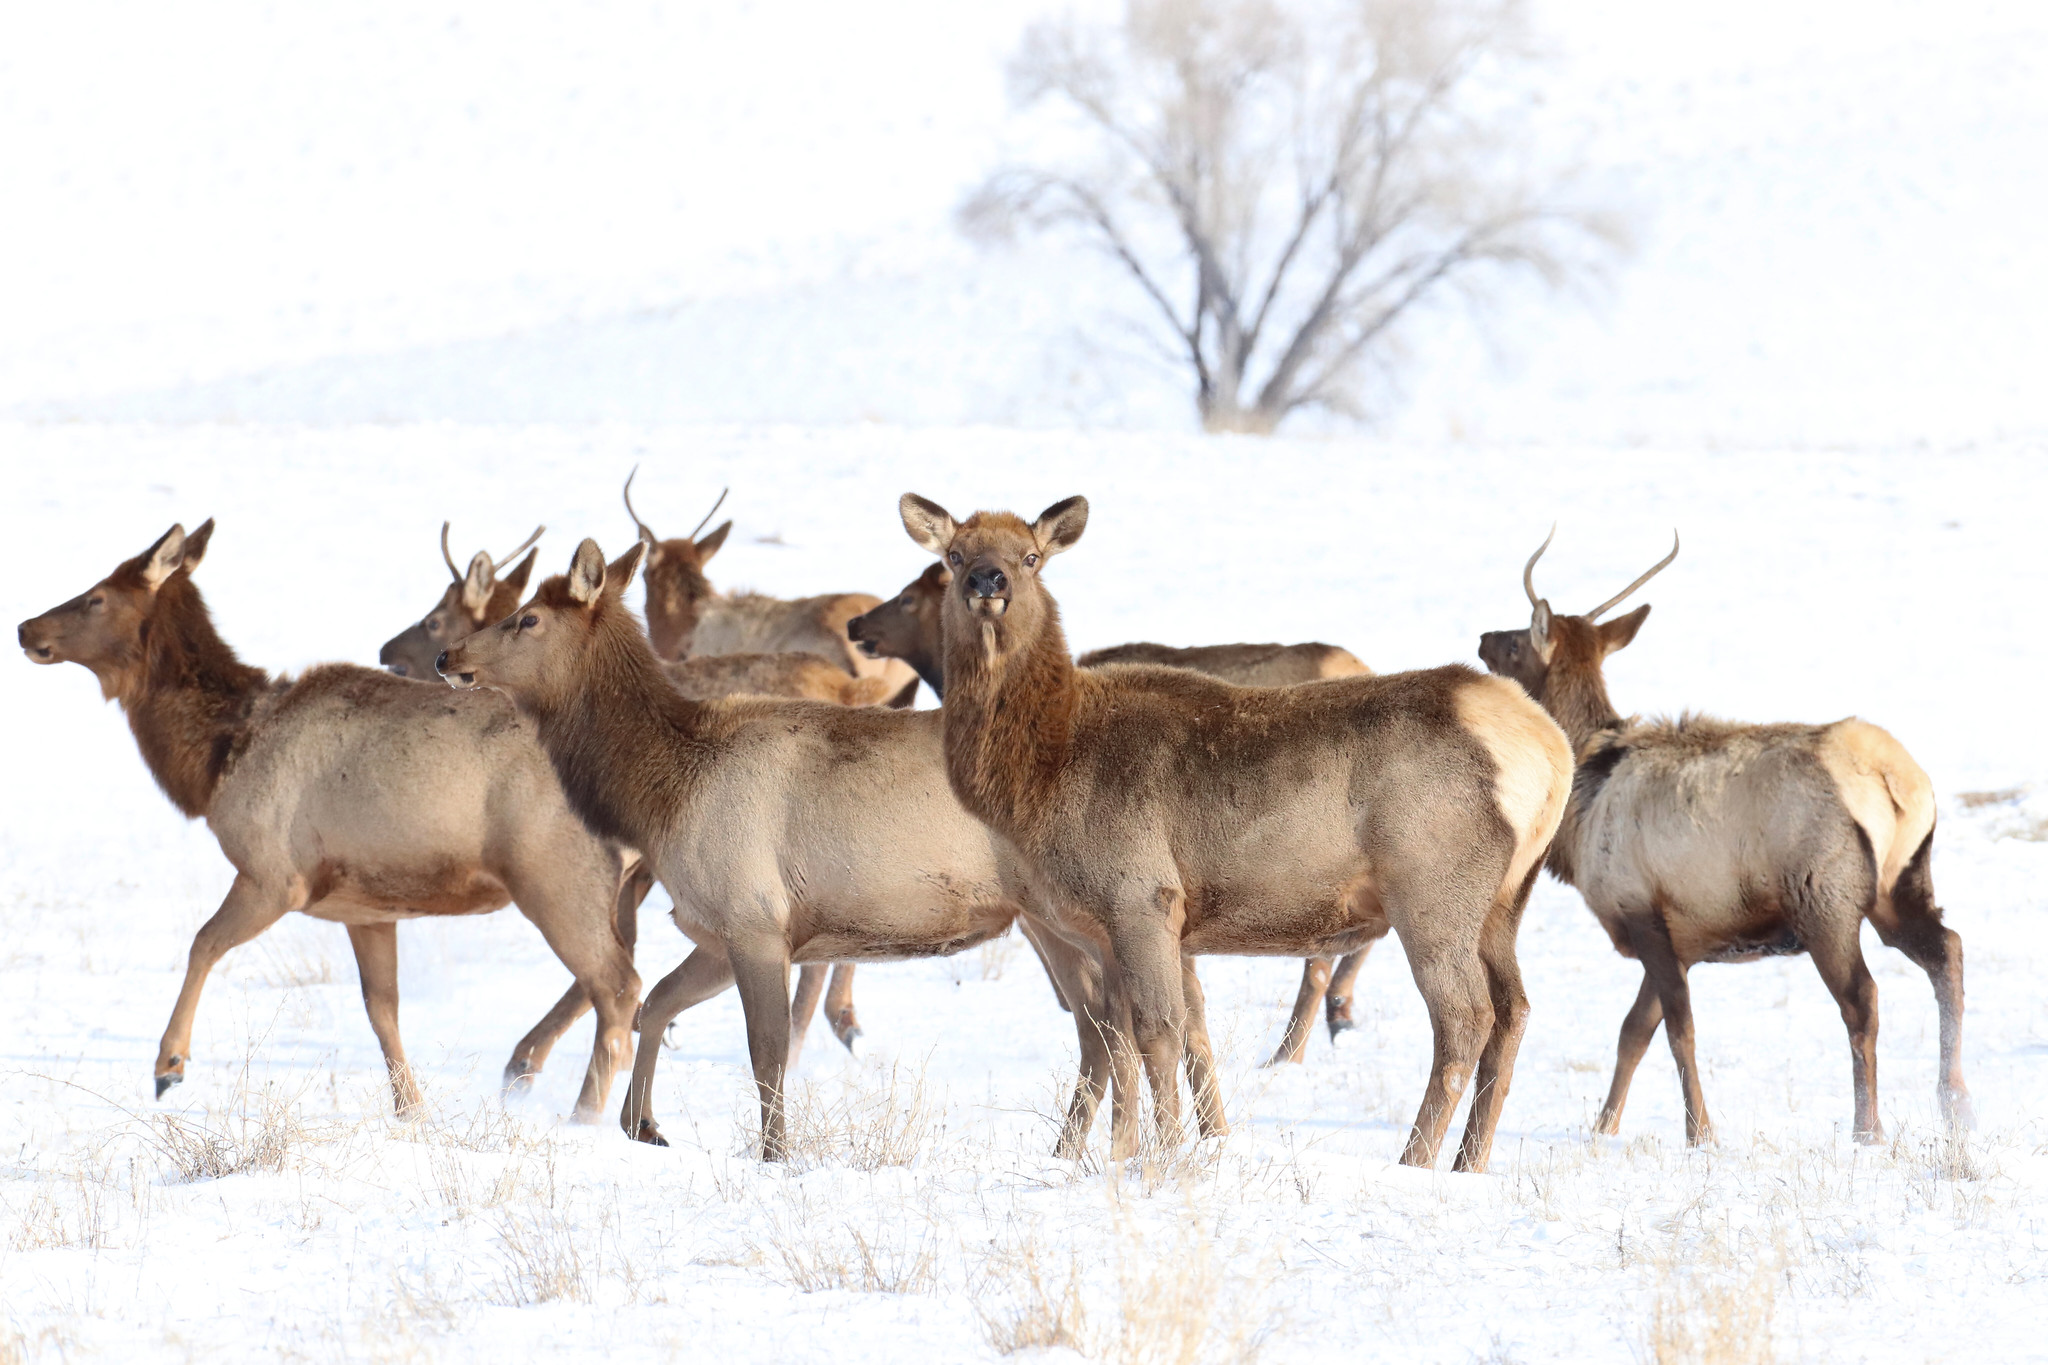 According to the recent study, elk in Utah have gotten pretty good at avoiding hunters on public lands and finding refuge on private lands during hunting season.